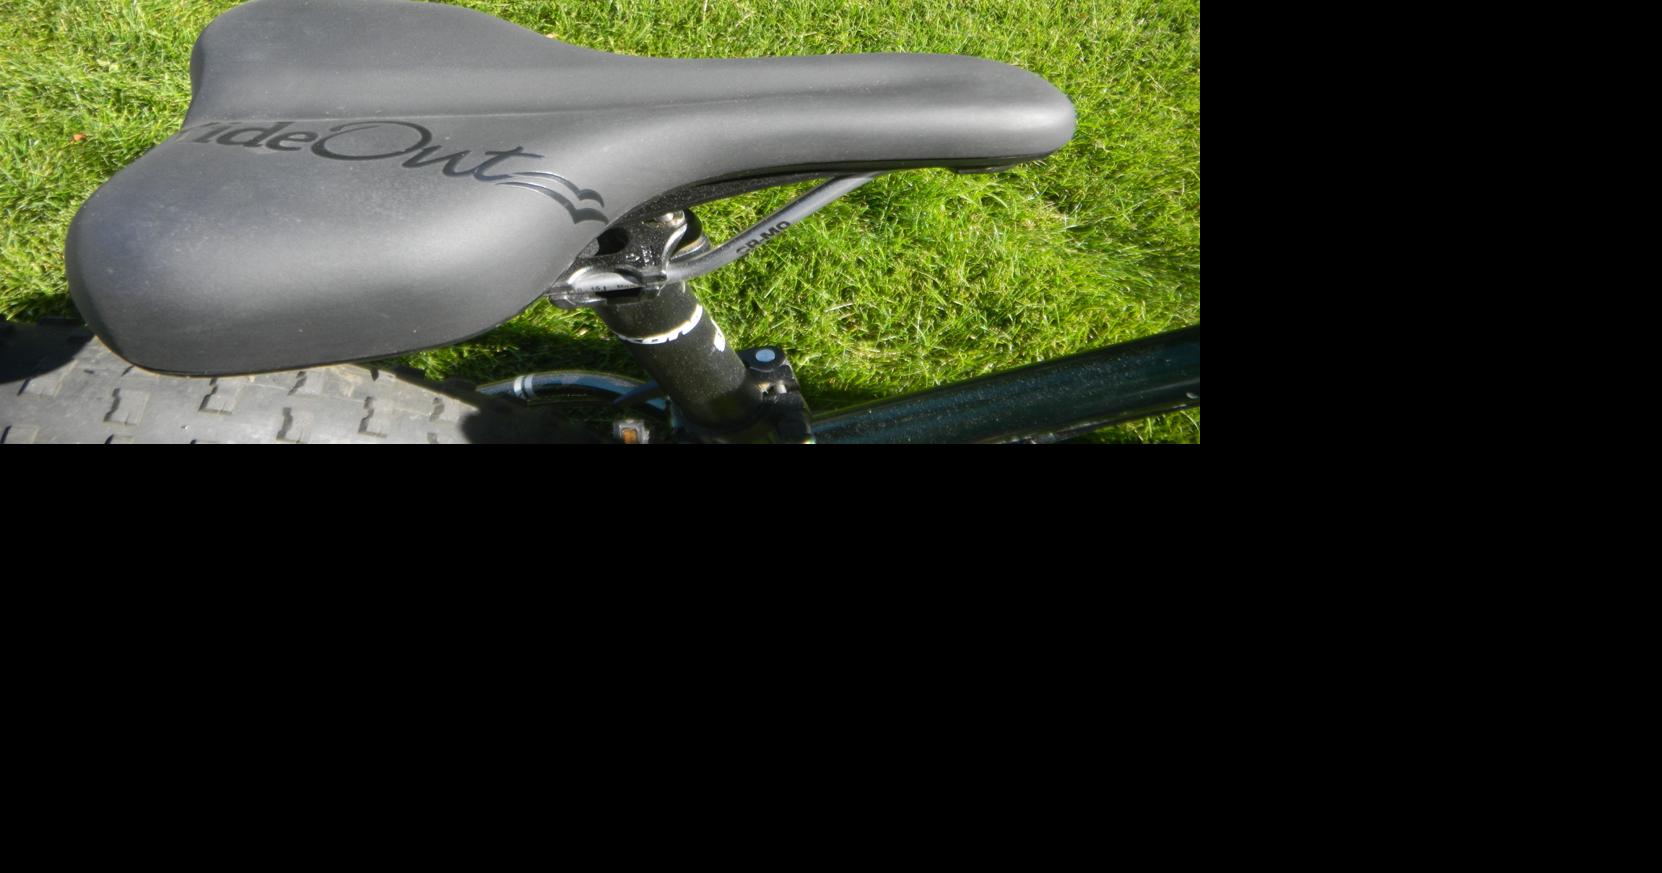 Carbon Comfort - The Original Comfortable Bike Seat from RideOut Tech